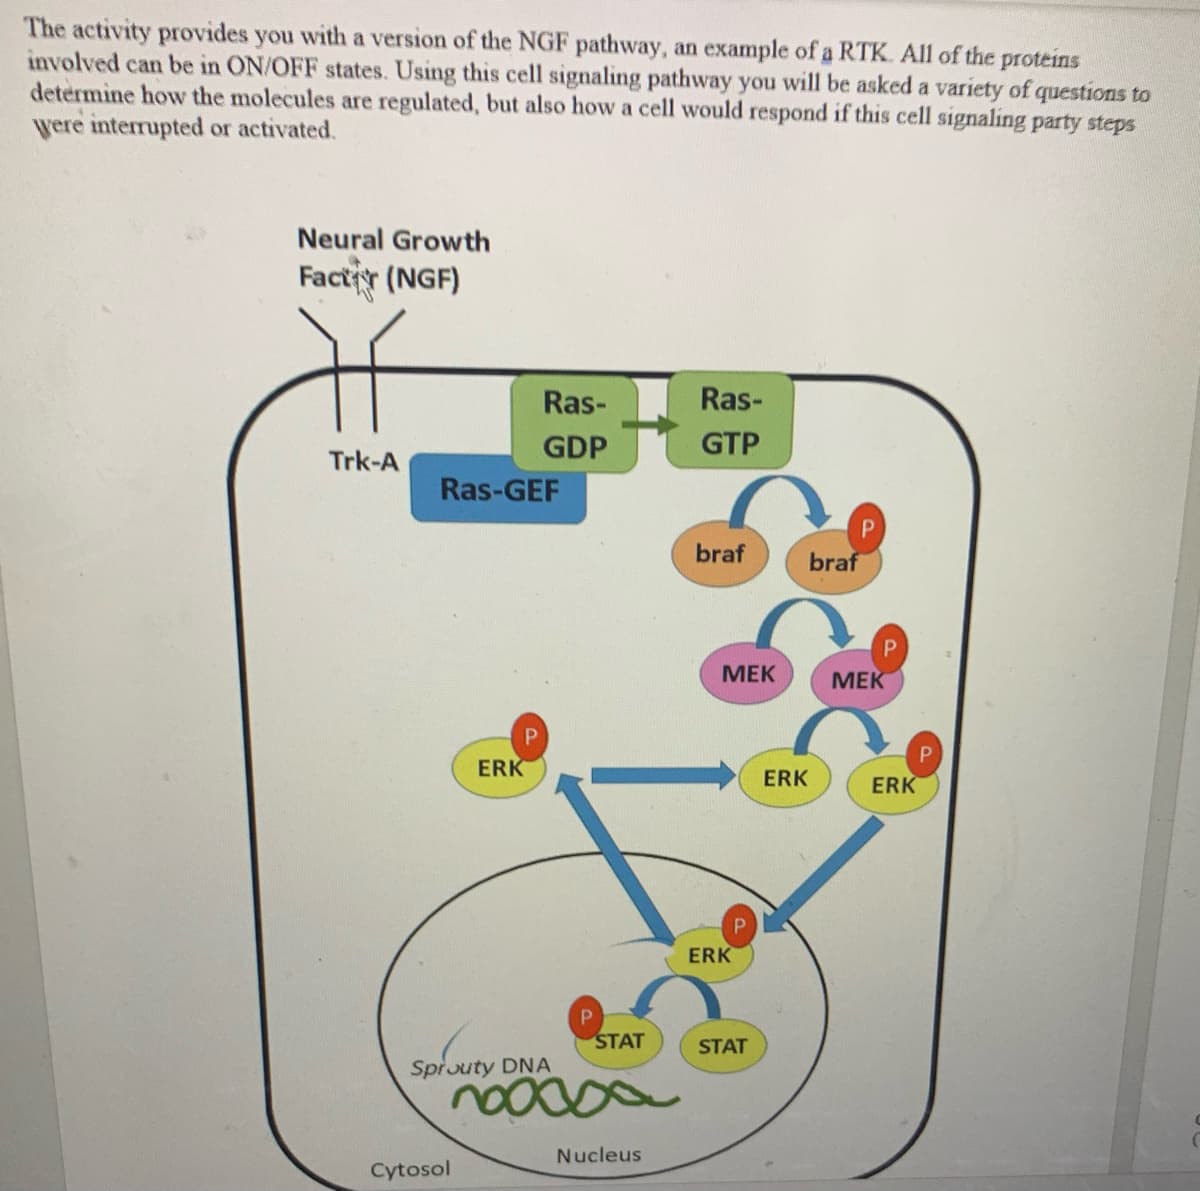 The activity provides you with a version of the NGF pathway, an example of a RTK. All of the proteins
involved can be in ON/OFF states. Using this cell signaling pathway you will be asked a variety of questions to
determine how the molecules are regulated, but also how a cell would respond if this cell signaling party steps
were interrupted or activated.
Neural Growth
Factir (NGF)
Ras-
Ras-
GDP
GTP
Trk-A
Ras-GEF
braf
braf
МЕК
МЕК
ERK
ERK
ERK
ERK
STAT
STAT
Spiouty DNA
Nucleus
Cytosol
